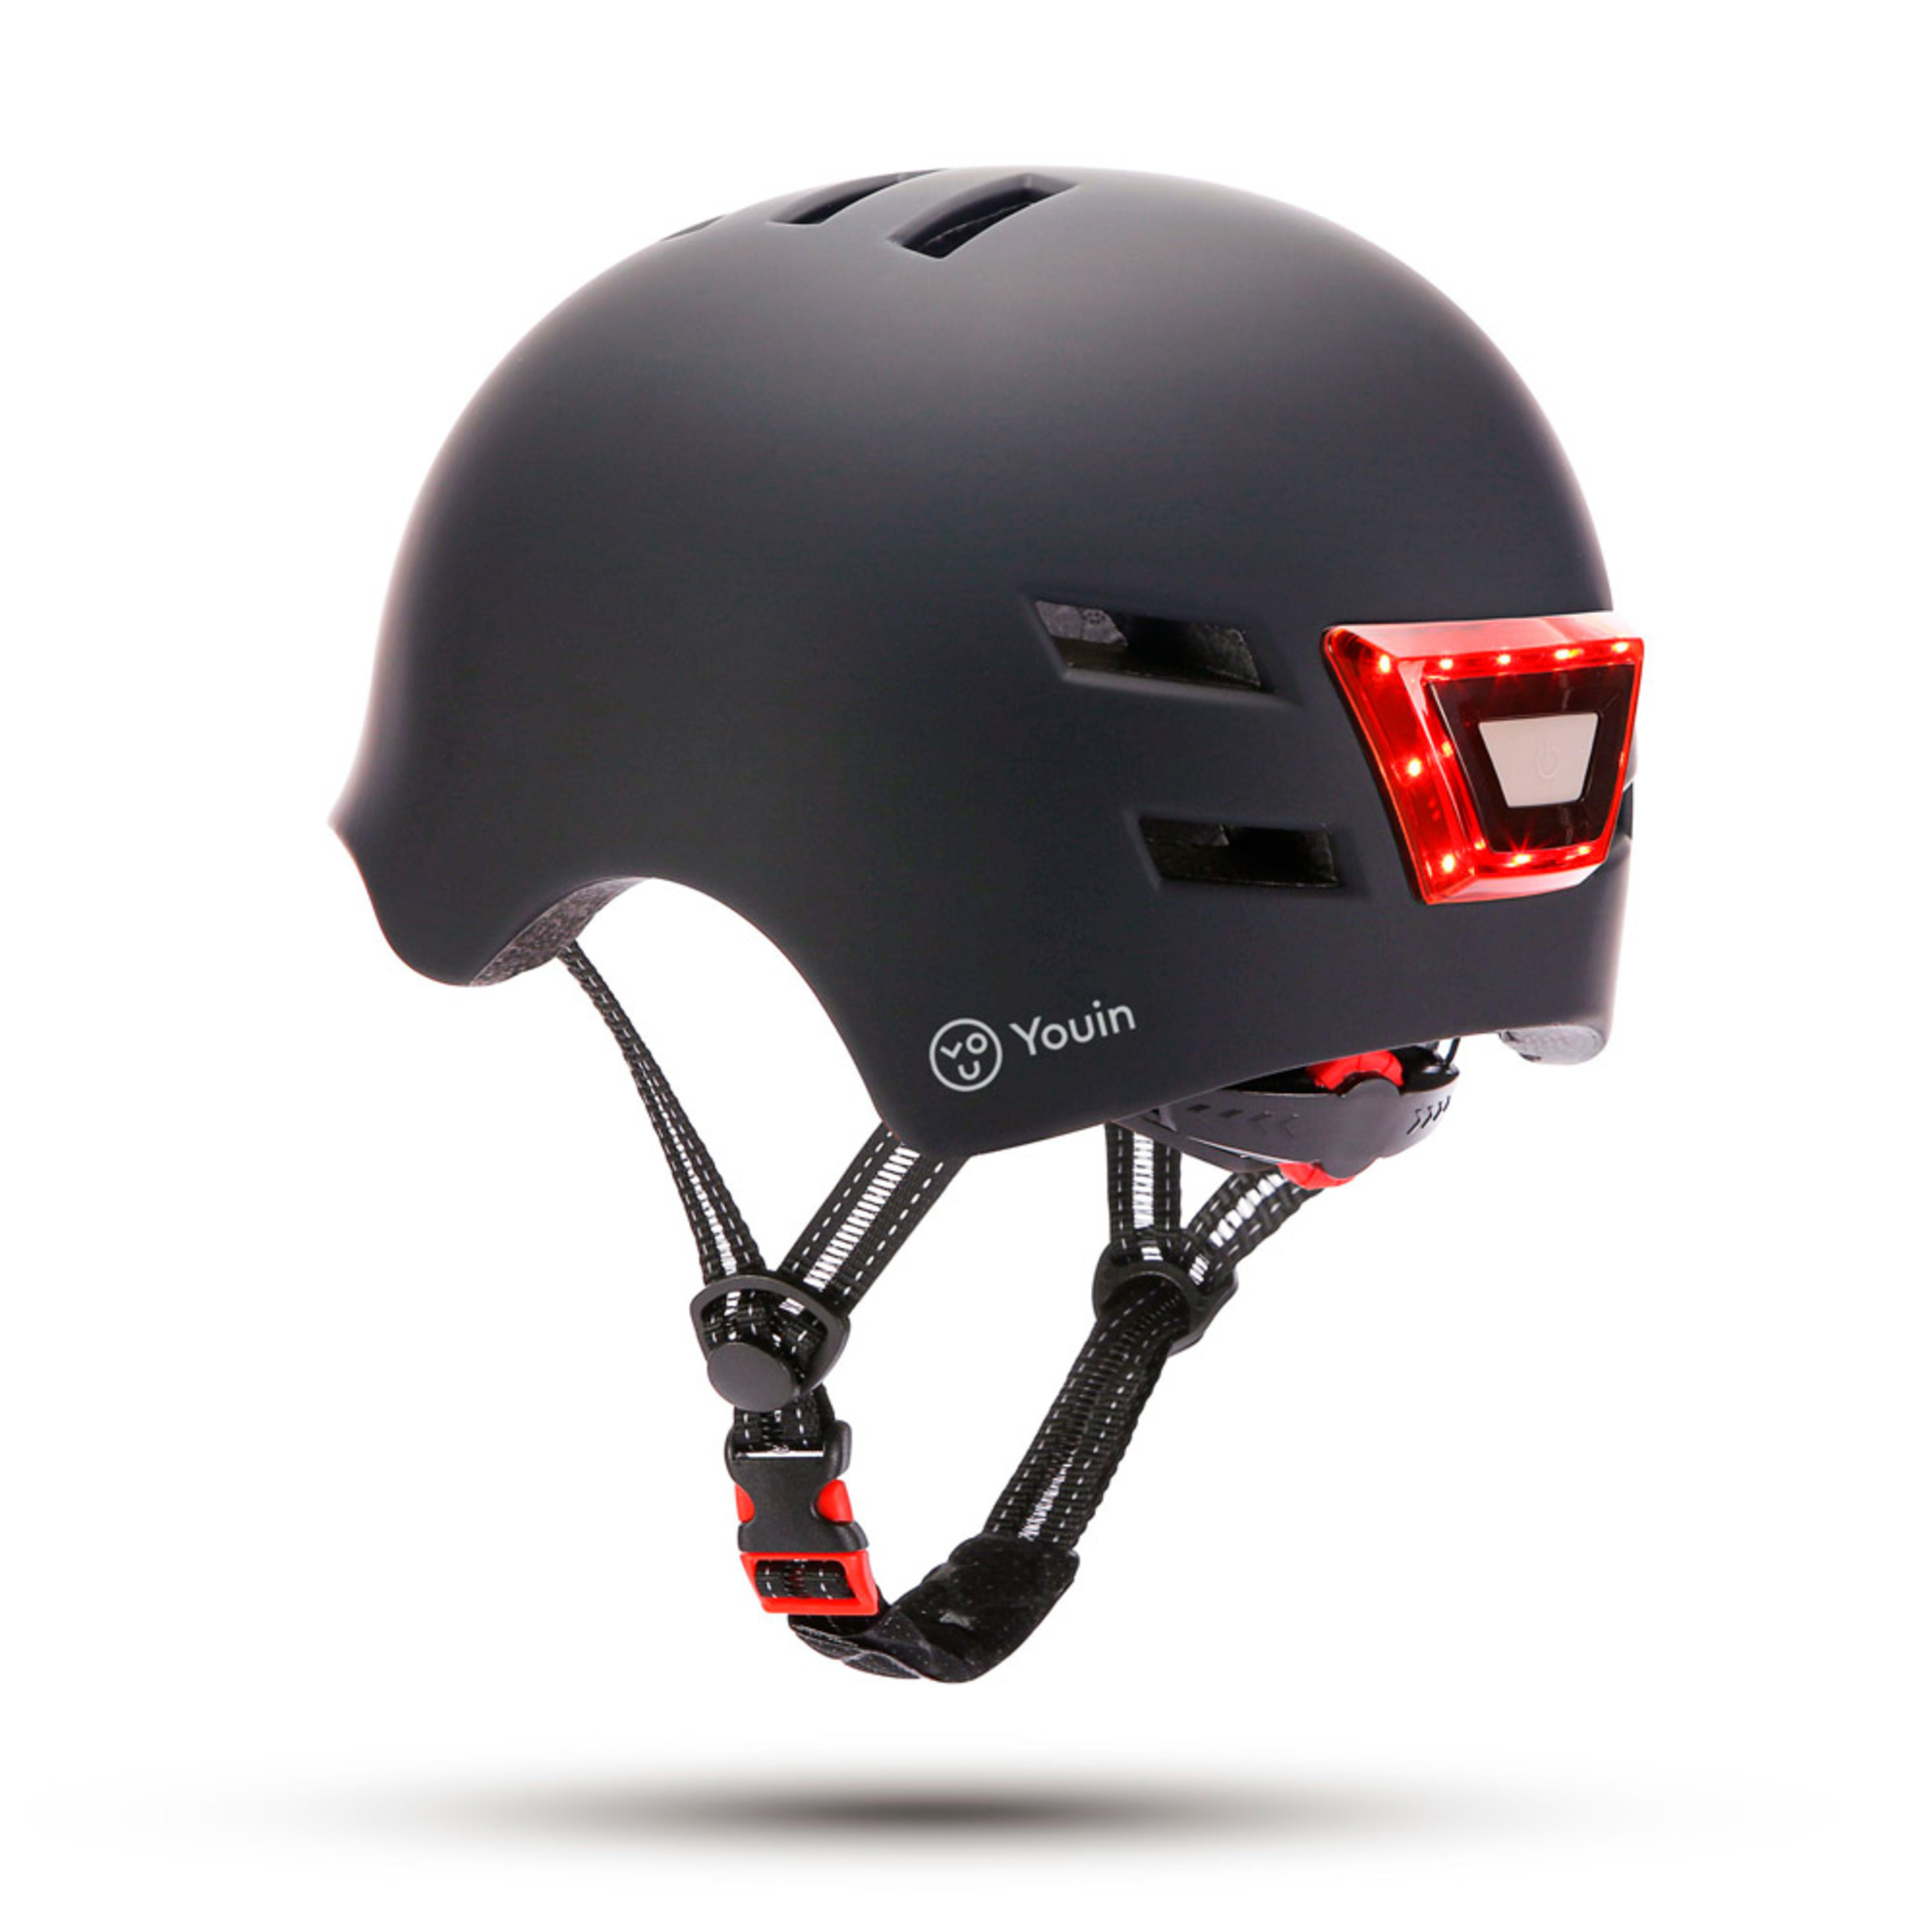 Casco Youin Con Luces Led Frontal Y Trasera Ajustable